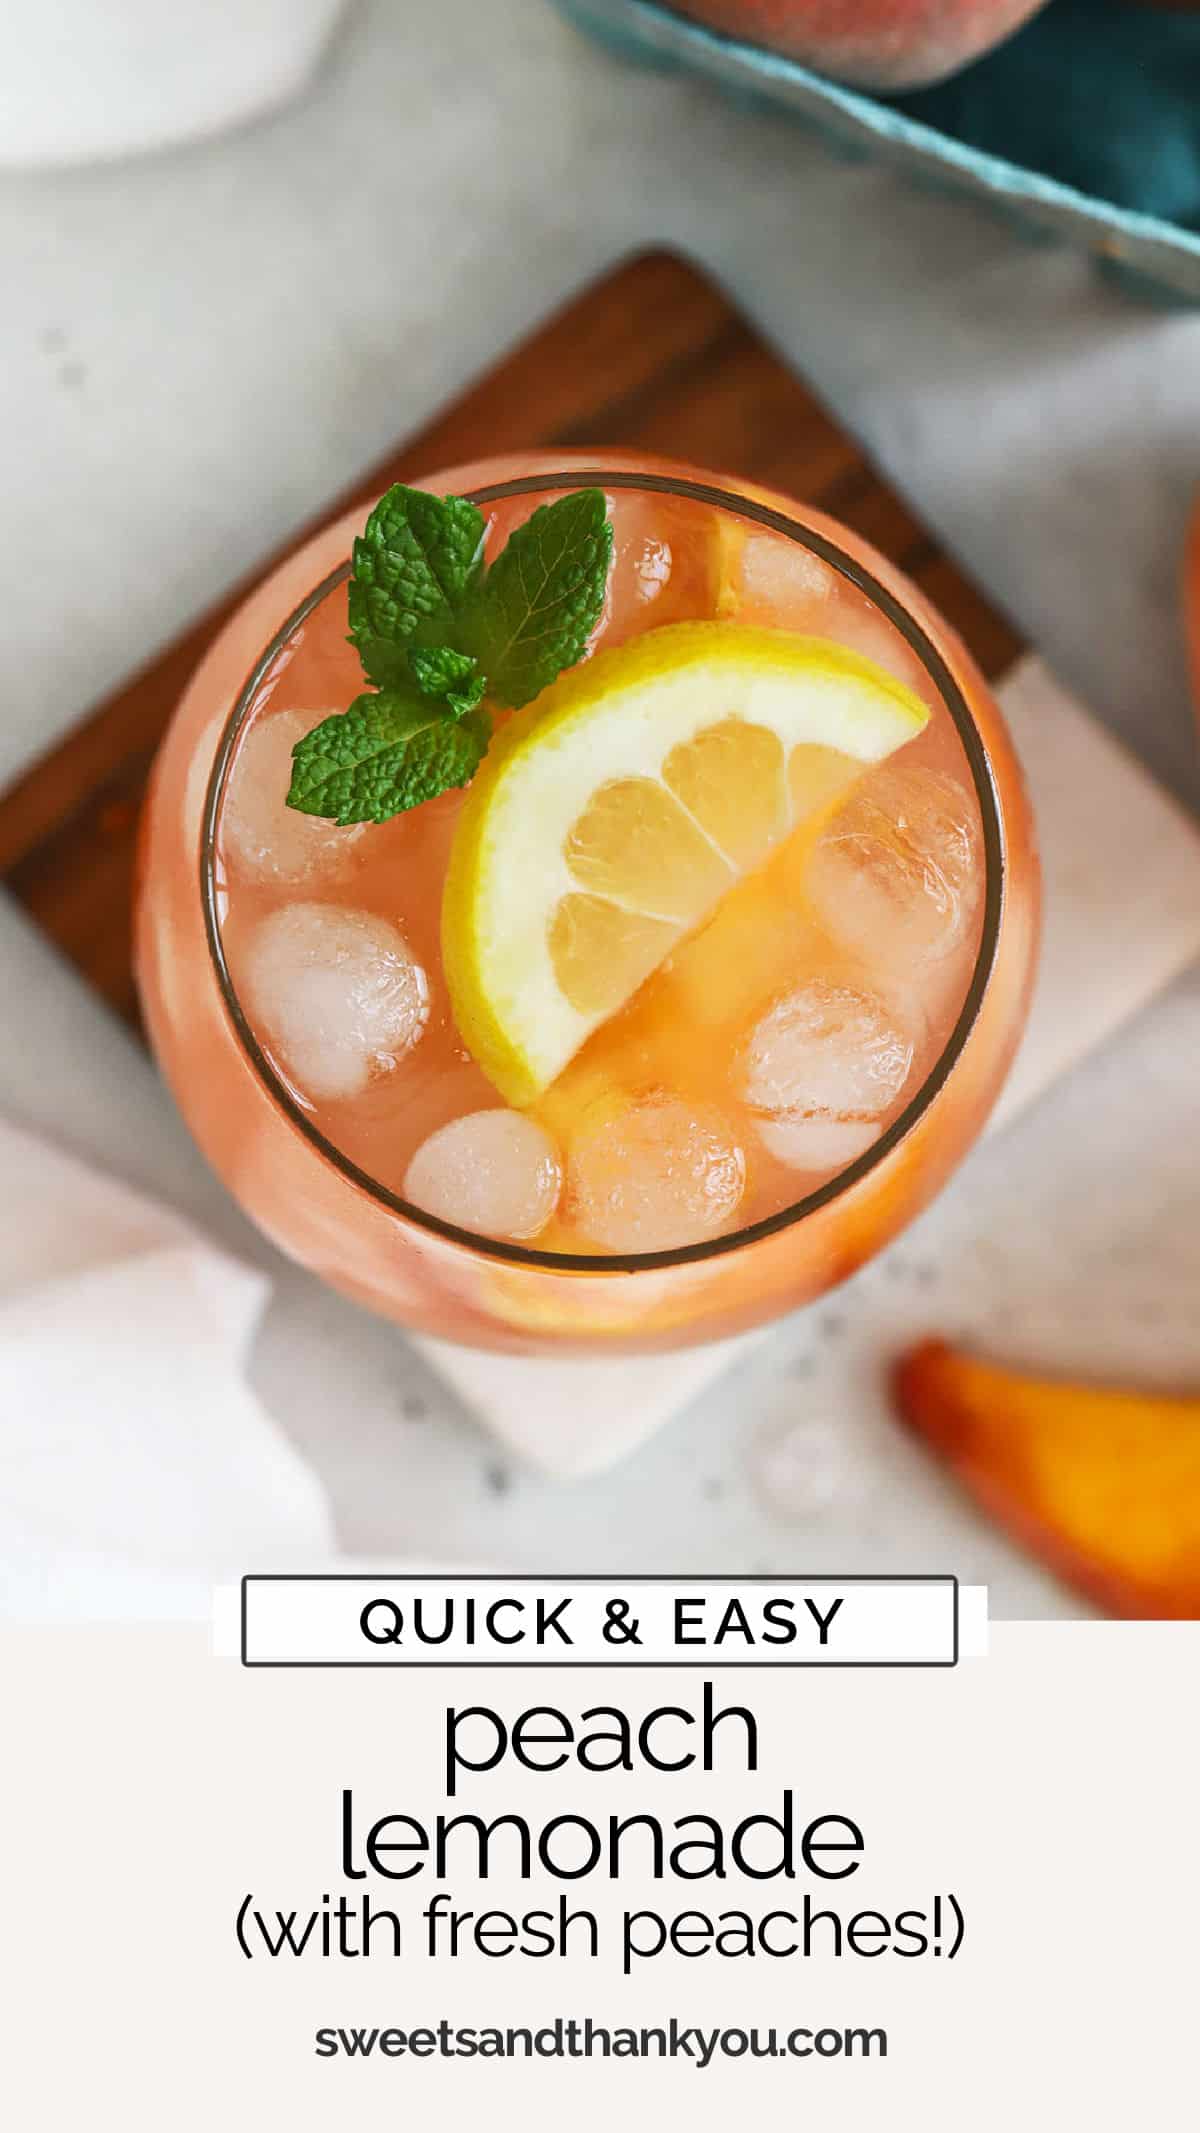 This easy homemade peach lemonade recipe is made with fresh (or frozen!) peaches and lemon juice to make a light, refreshing summer drink you won't want to miss. / peach lemonade from scratch / peach lemonade without concentrate / peach lemonade with fresh peaches / peach lemonade with frozen peaches / easy peach lemonade recipe / peach mocktail / summer drink / peach flavored lemonade recipe 